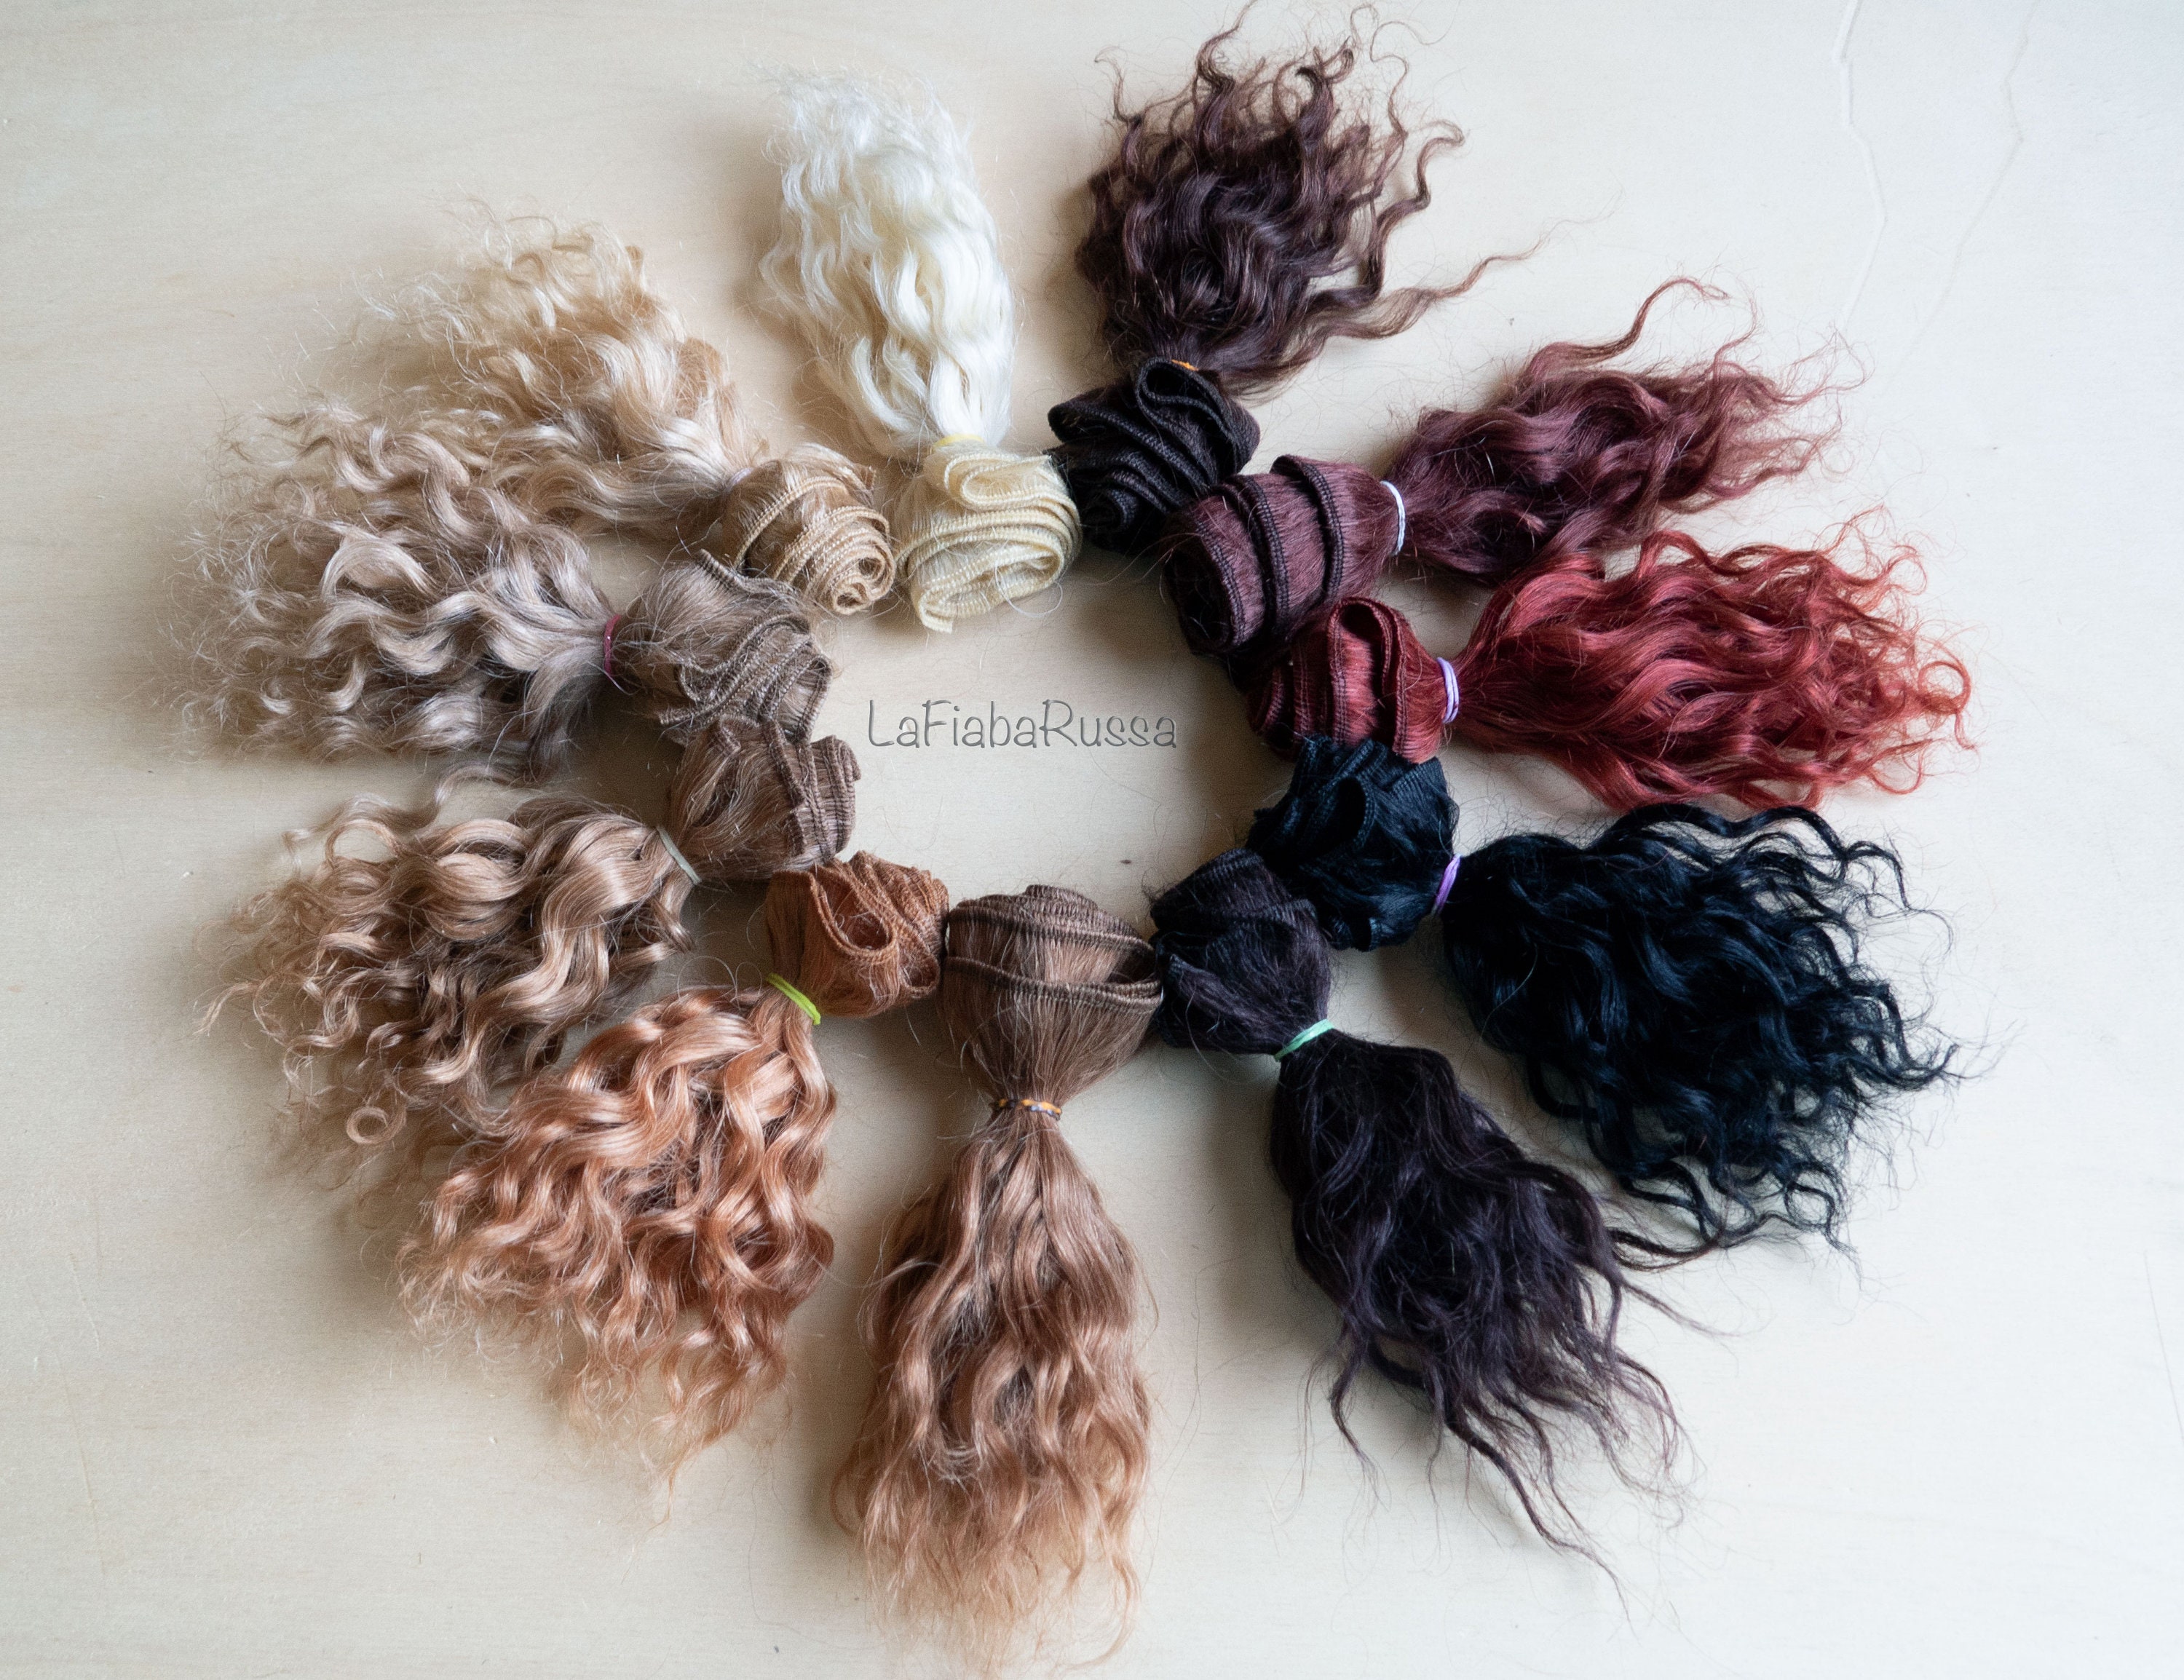 12pcs Doll Wig Doll DIY Wig Doll Hair wefts Wigs Wig Doll Hair Wefts Curly  Doll Hair Fashion Doll Hair Straight Doll Hair for Crafts Component